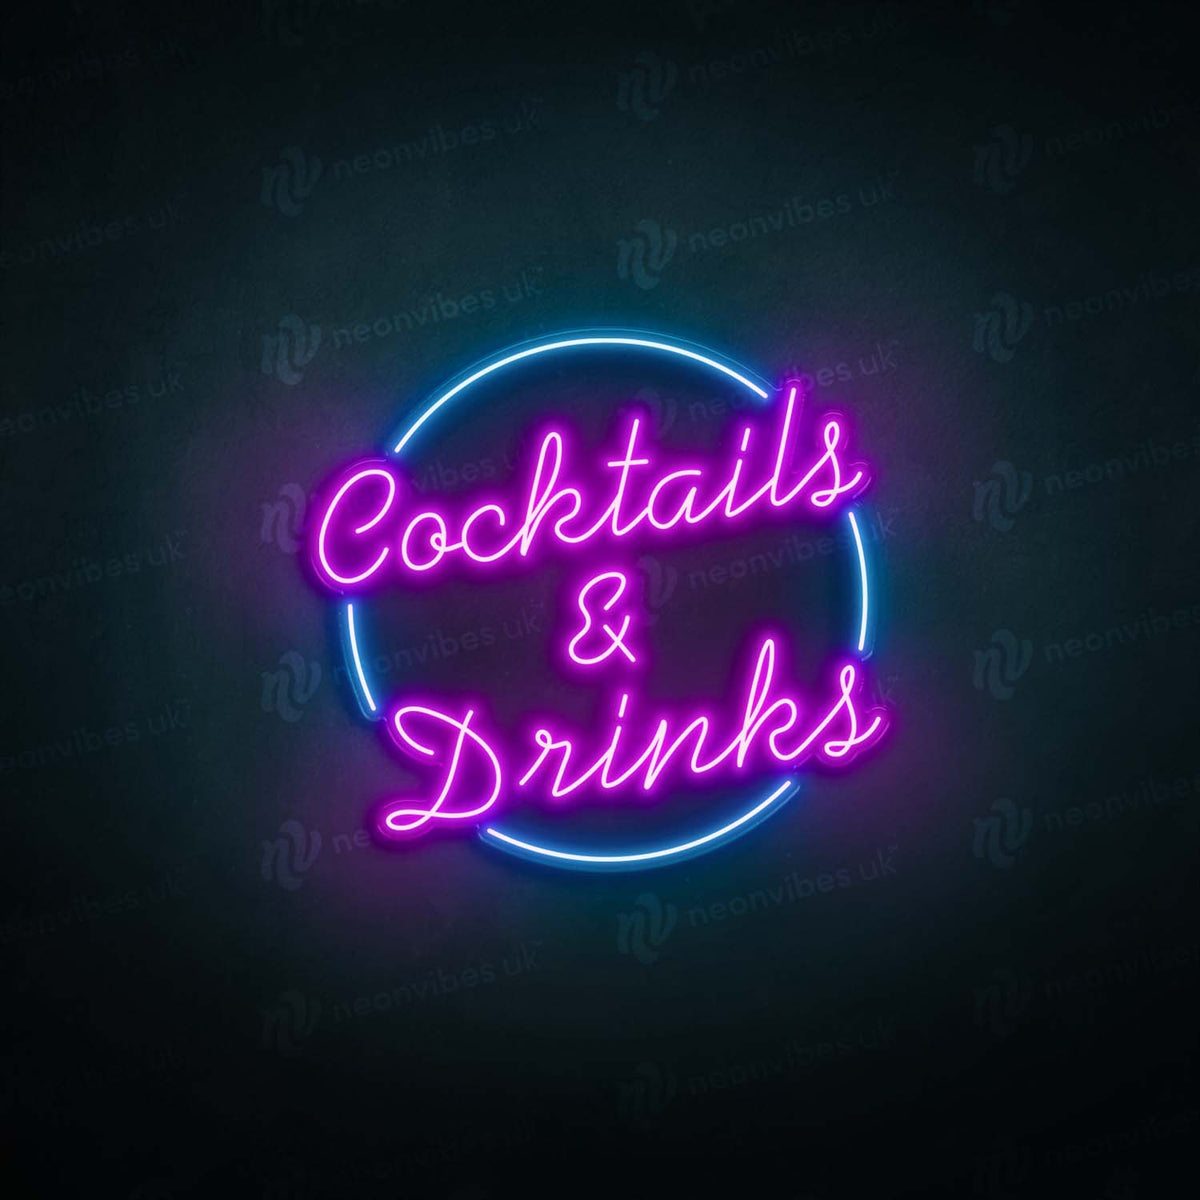 Cocktails and Drinks neon sign